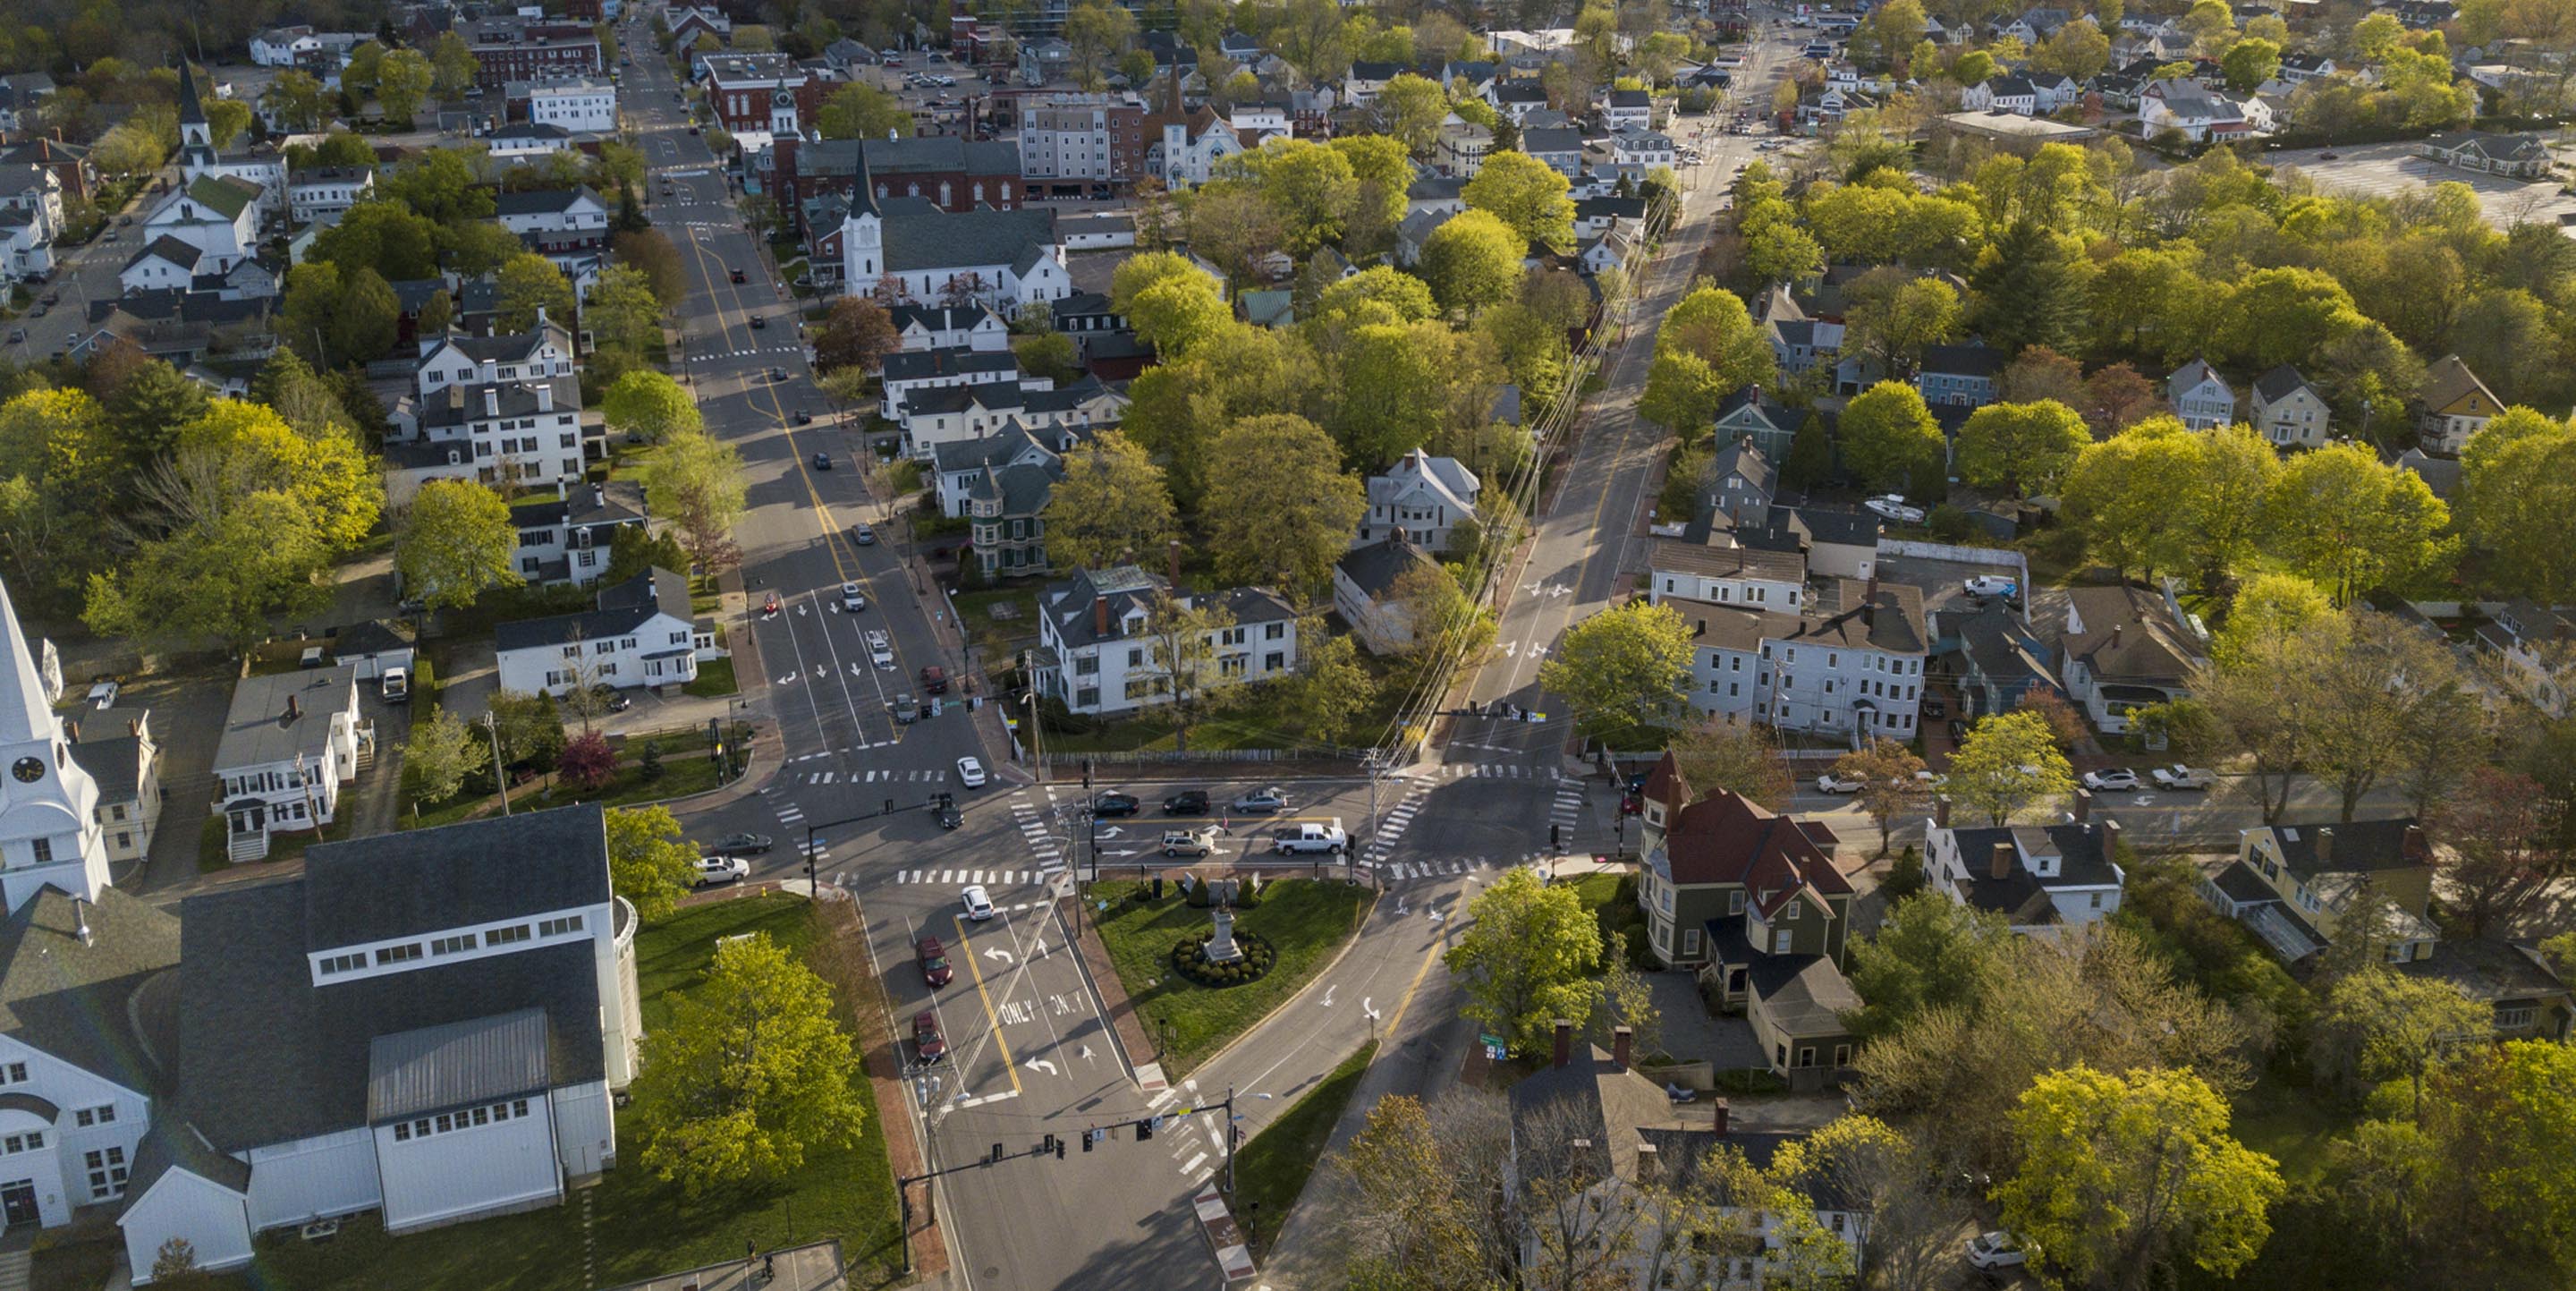 aerial view of the City of Saco downtown